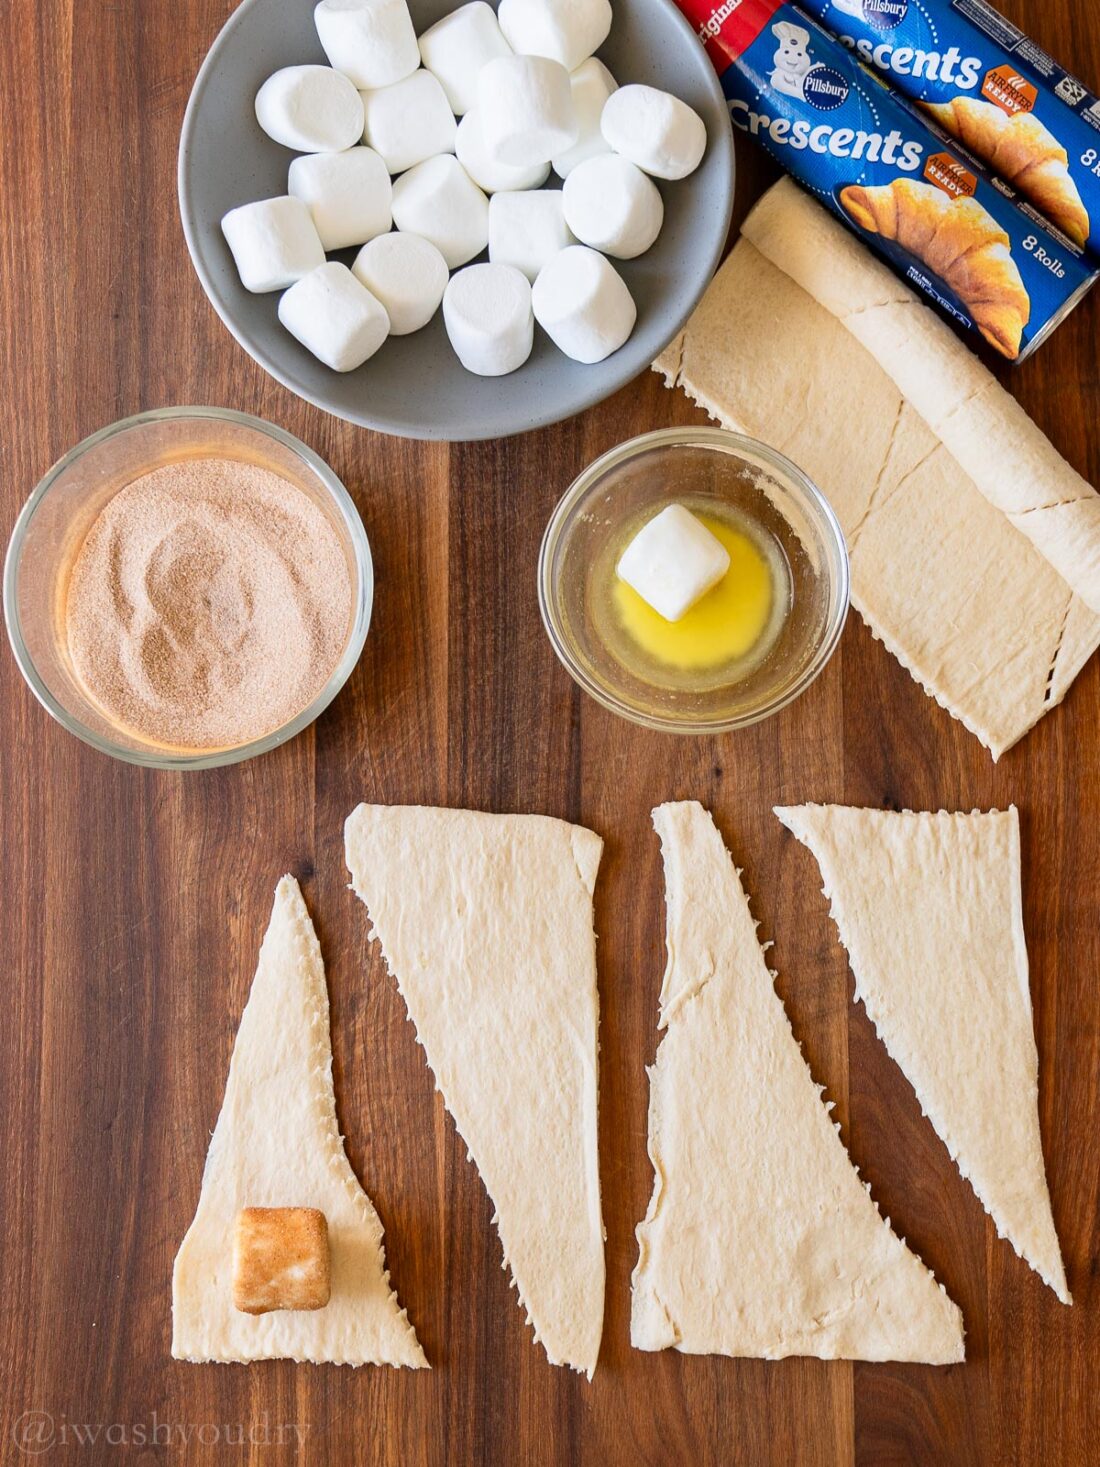 Preparing crescent rolls with marshmallows on a wooden surface.